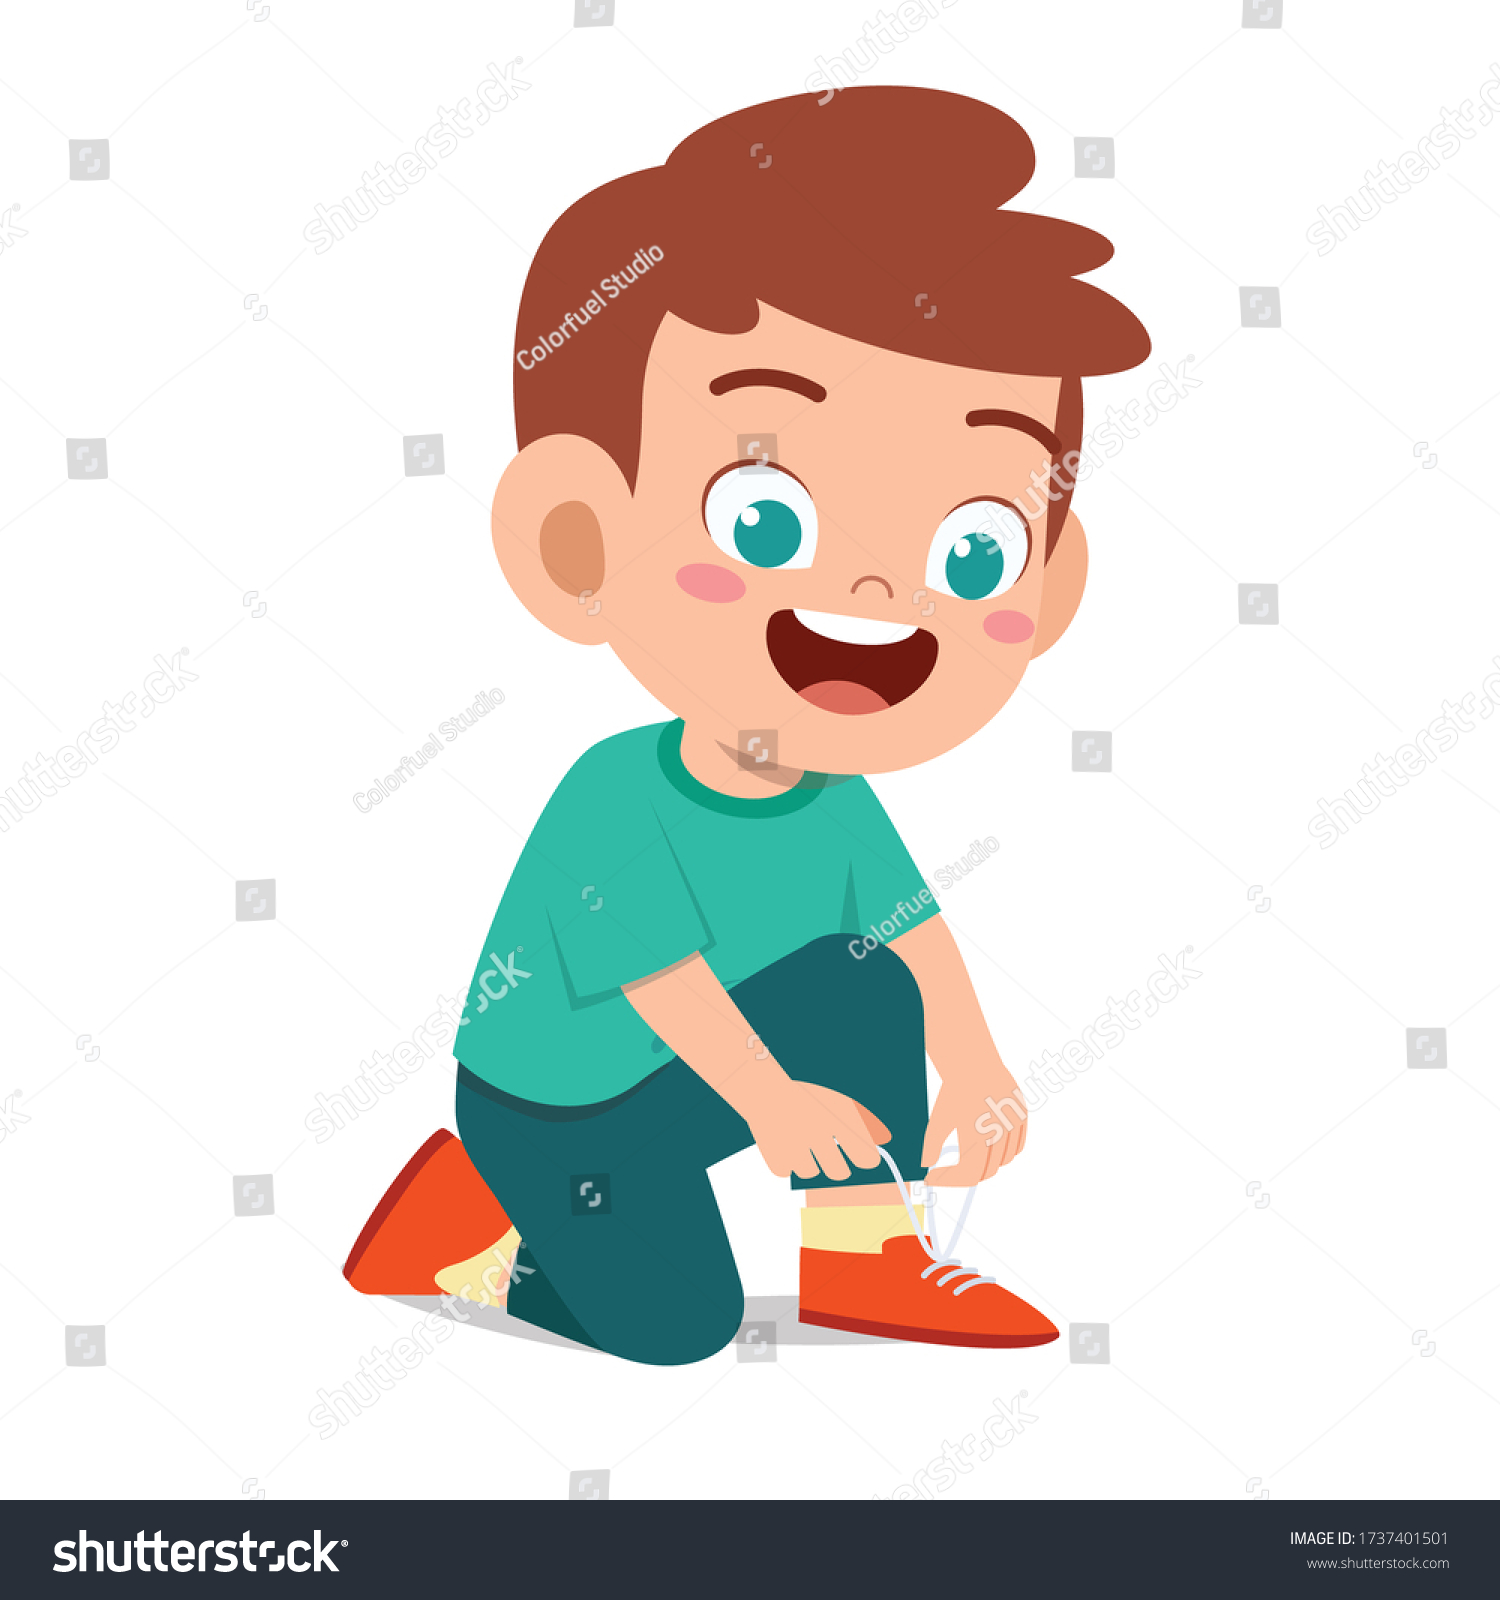 4,484 Kids wearing shoes Stock Illustrations, Images & Vectors ...